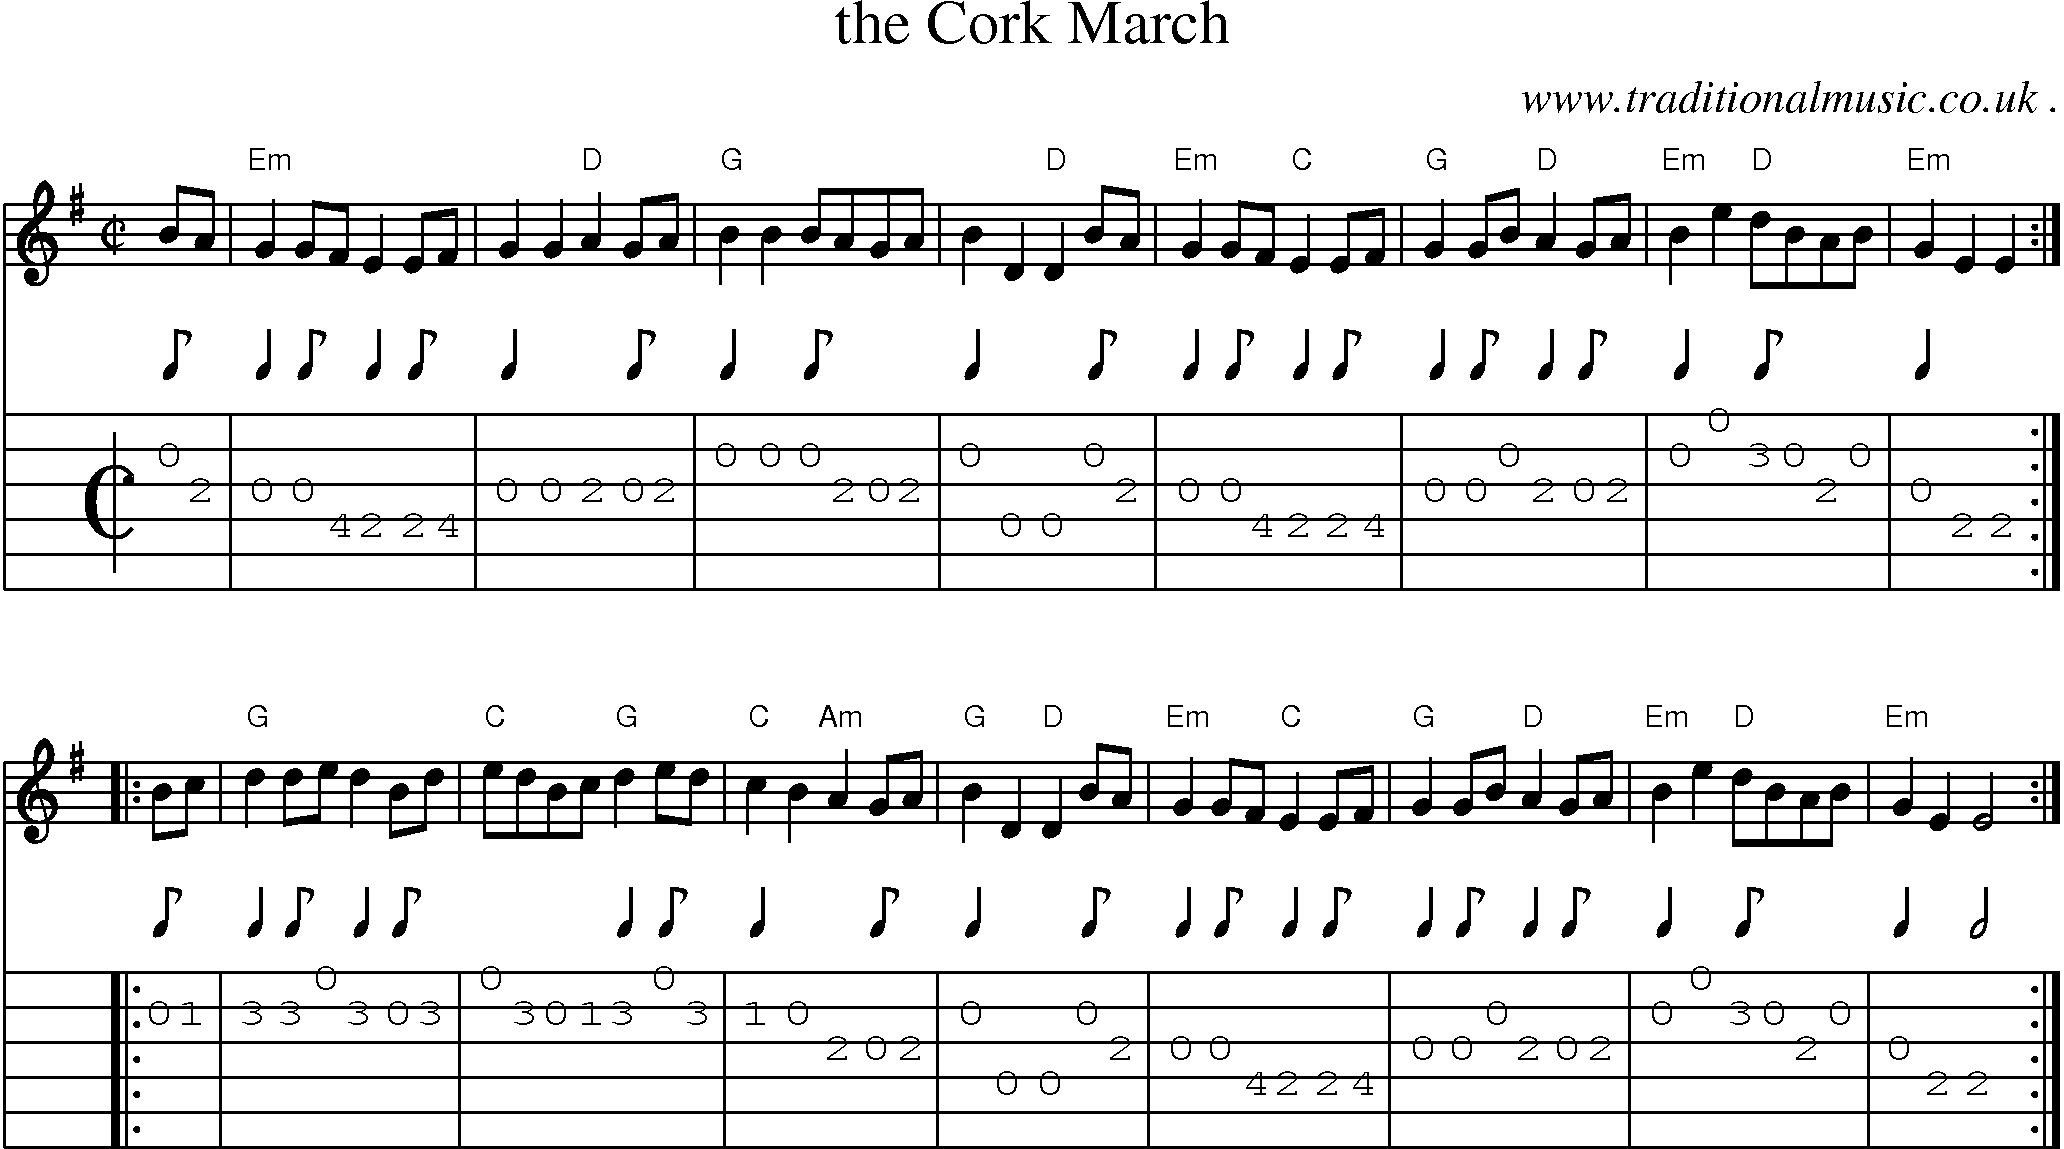 Sheet-music  score, Chords and Guitar Tabs for The Cork March